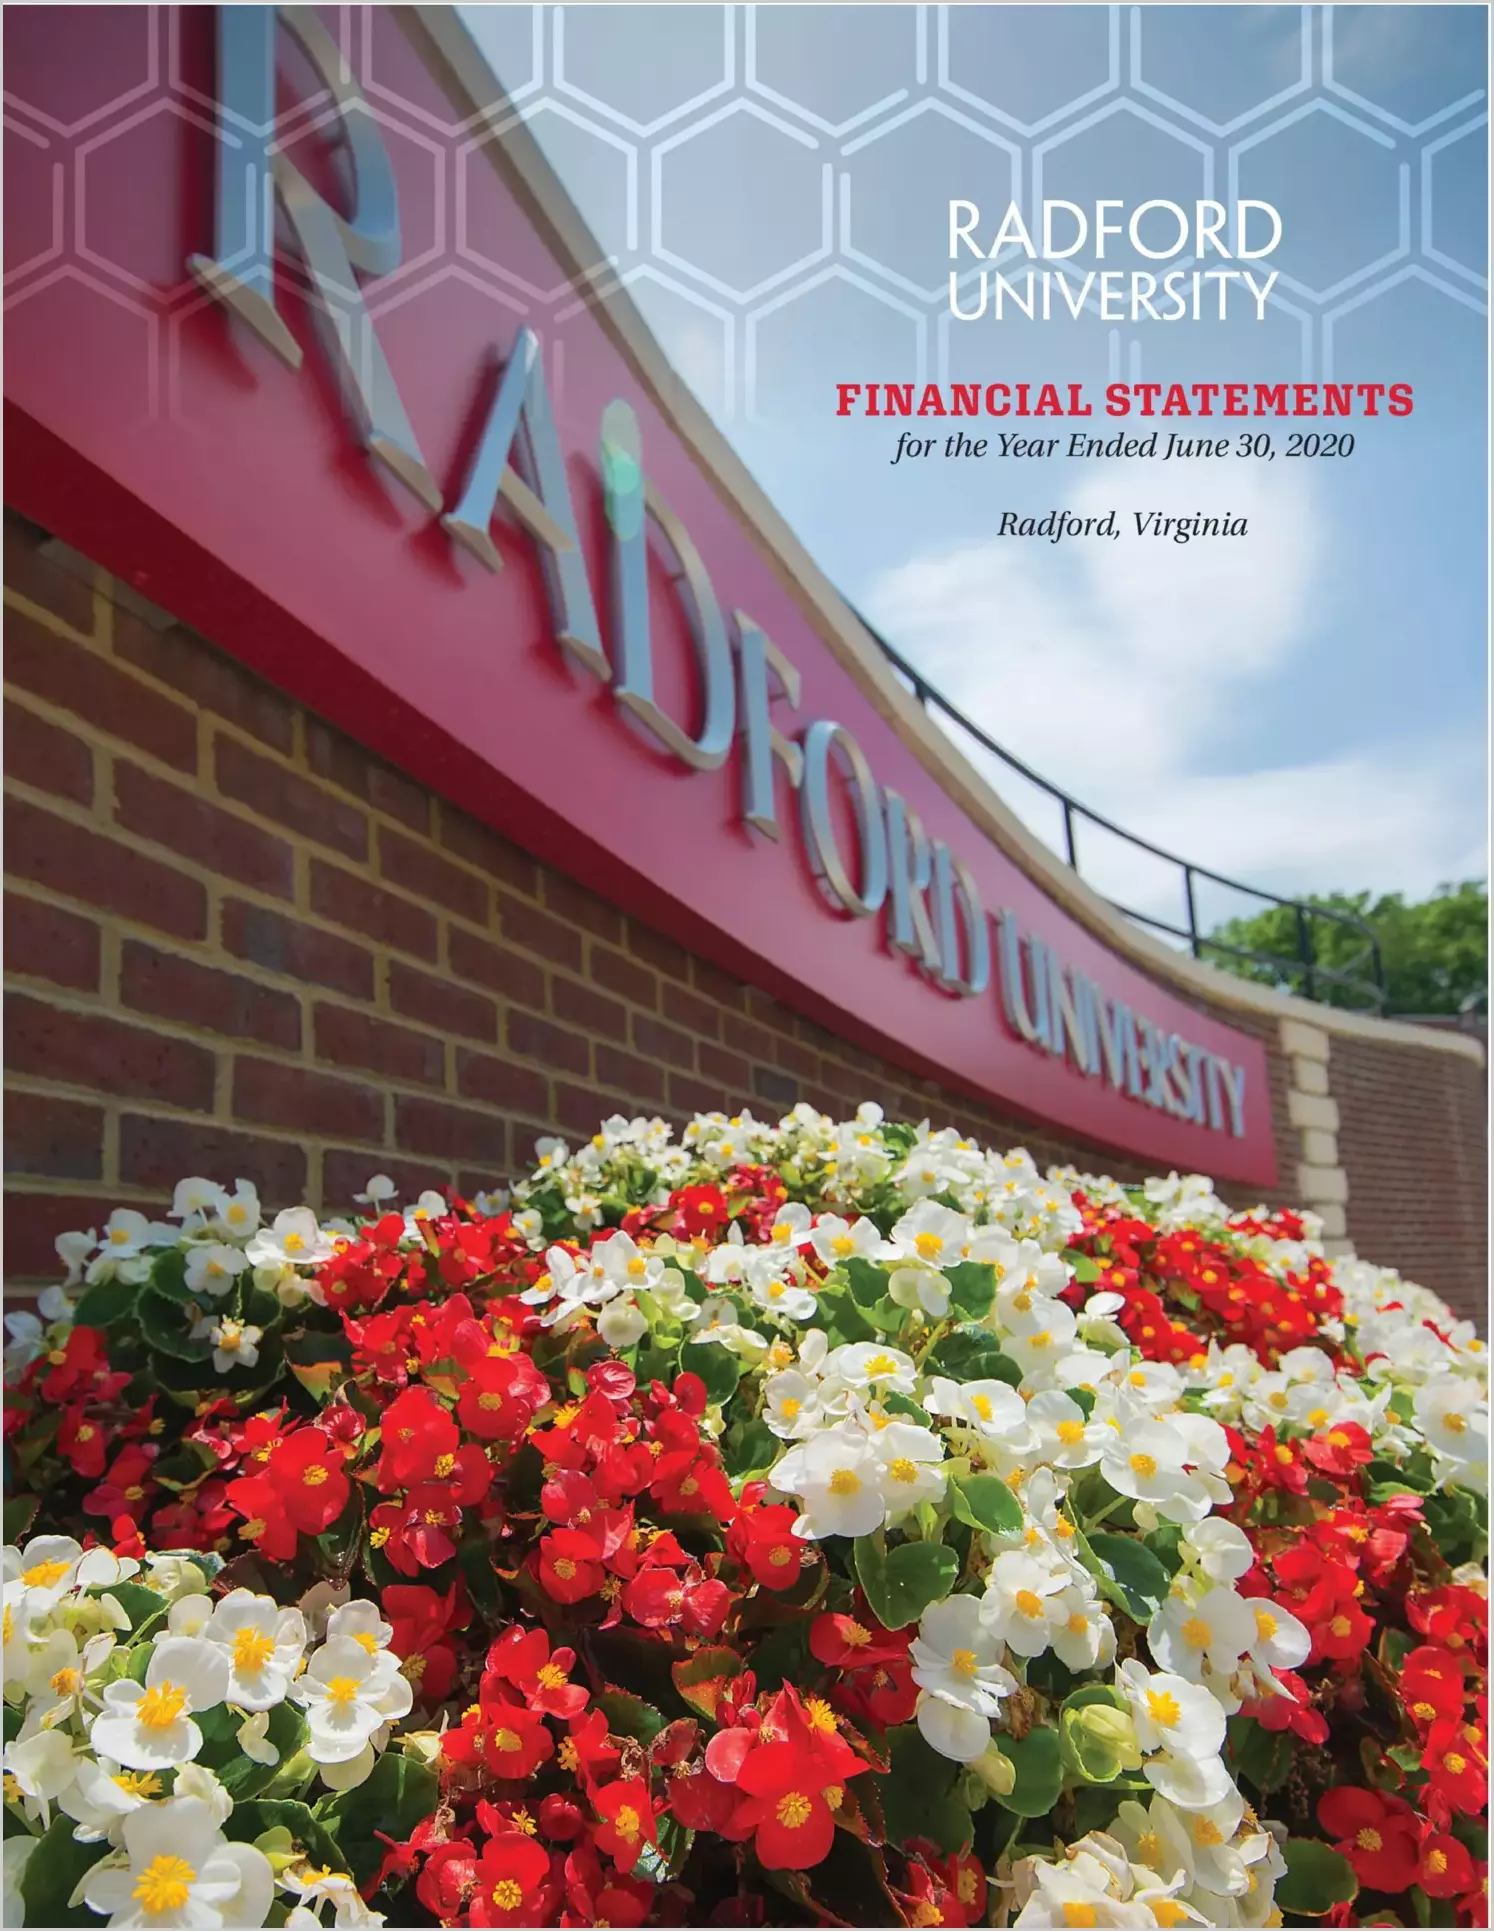 Radford University Financial Statements for the year ended June 30, 2020